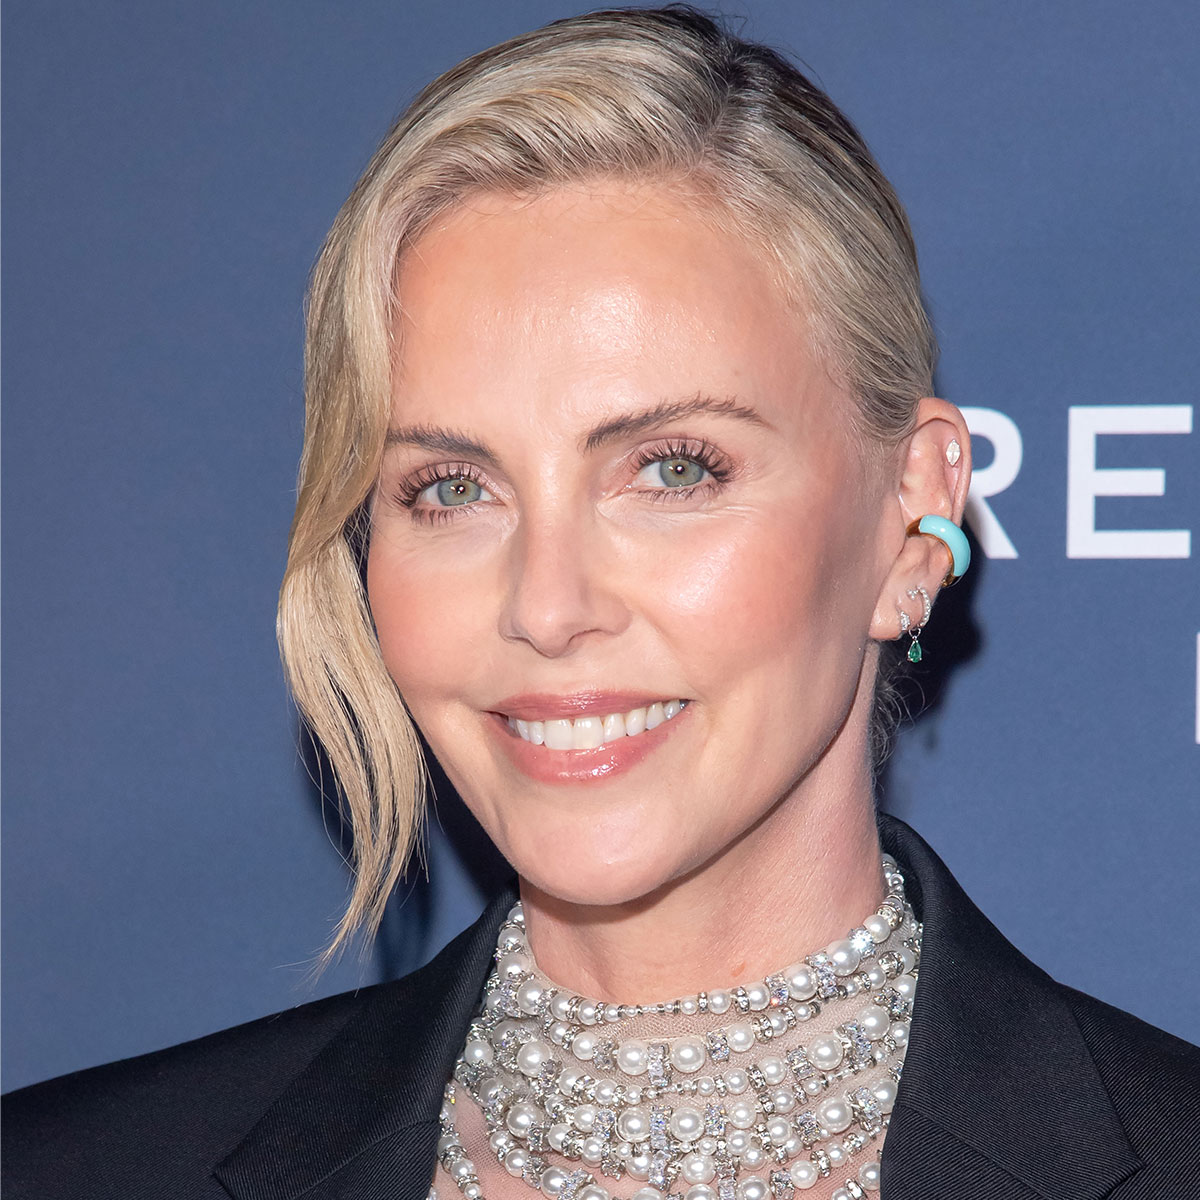 Charlize Theron Displays Her Toned Legs In A Tennis Skirt While Hosting The 20th Annual Desert Smash As Fans React: ‘She Looks 25’